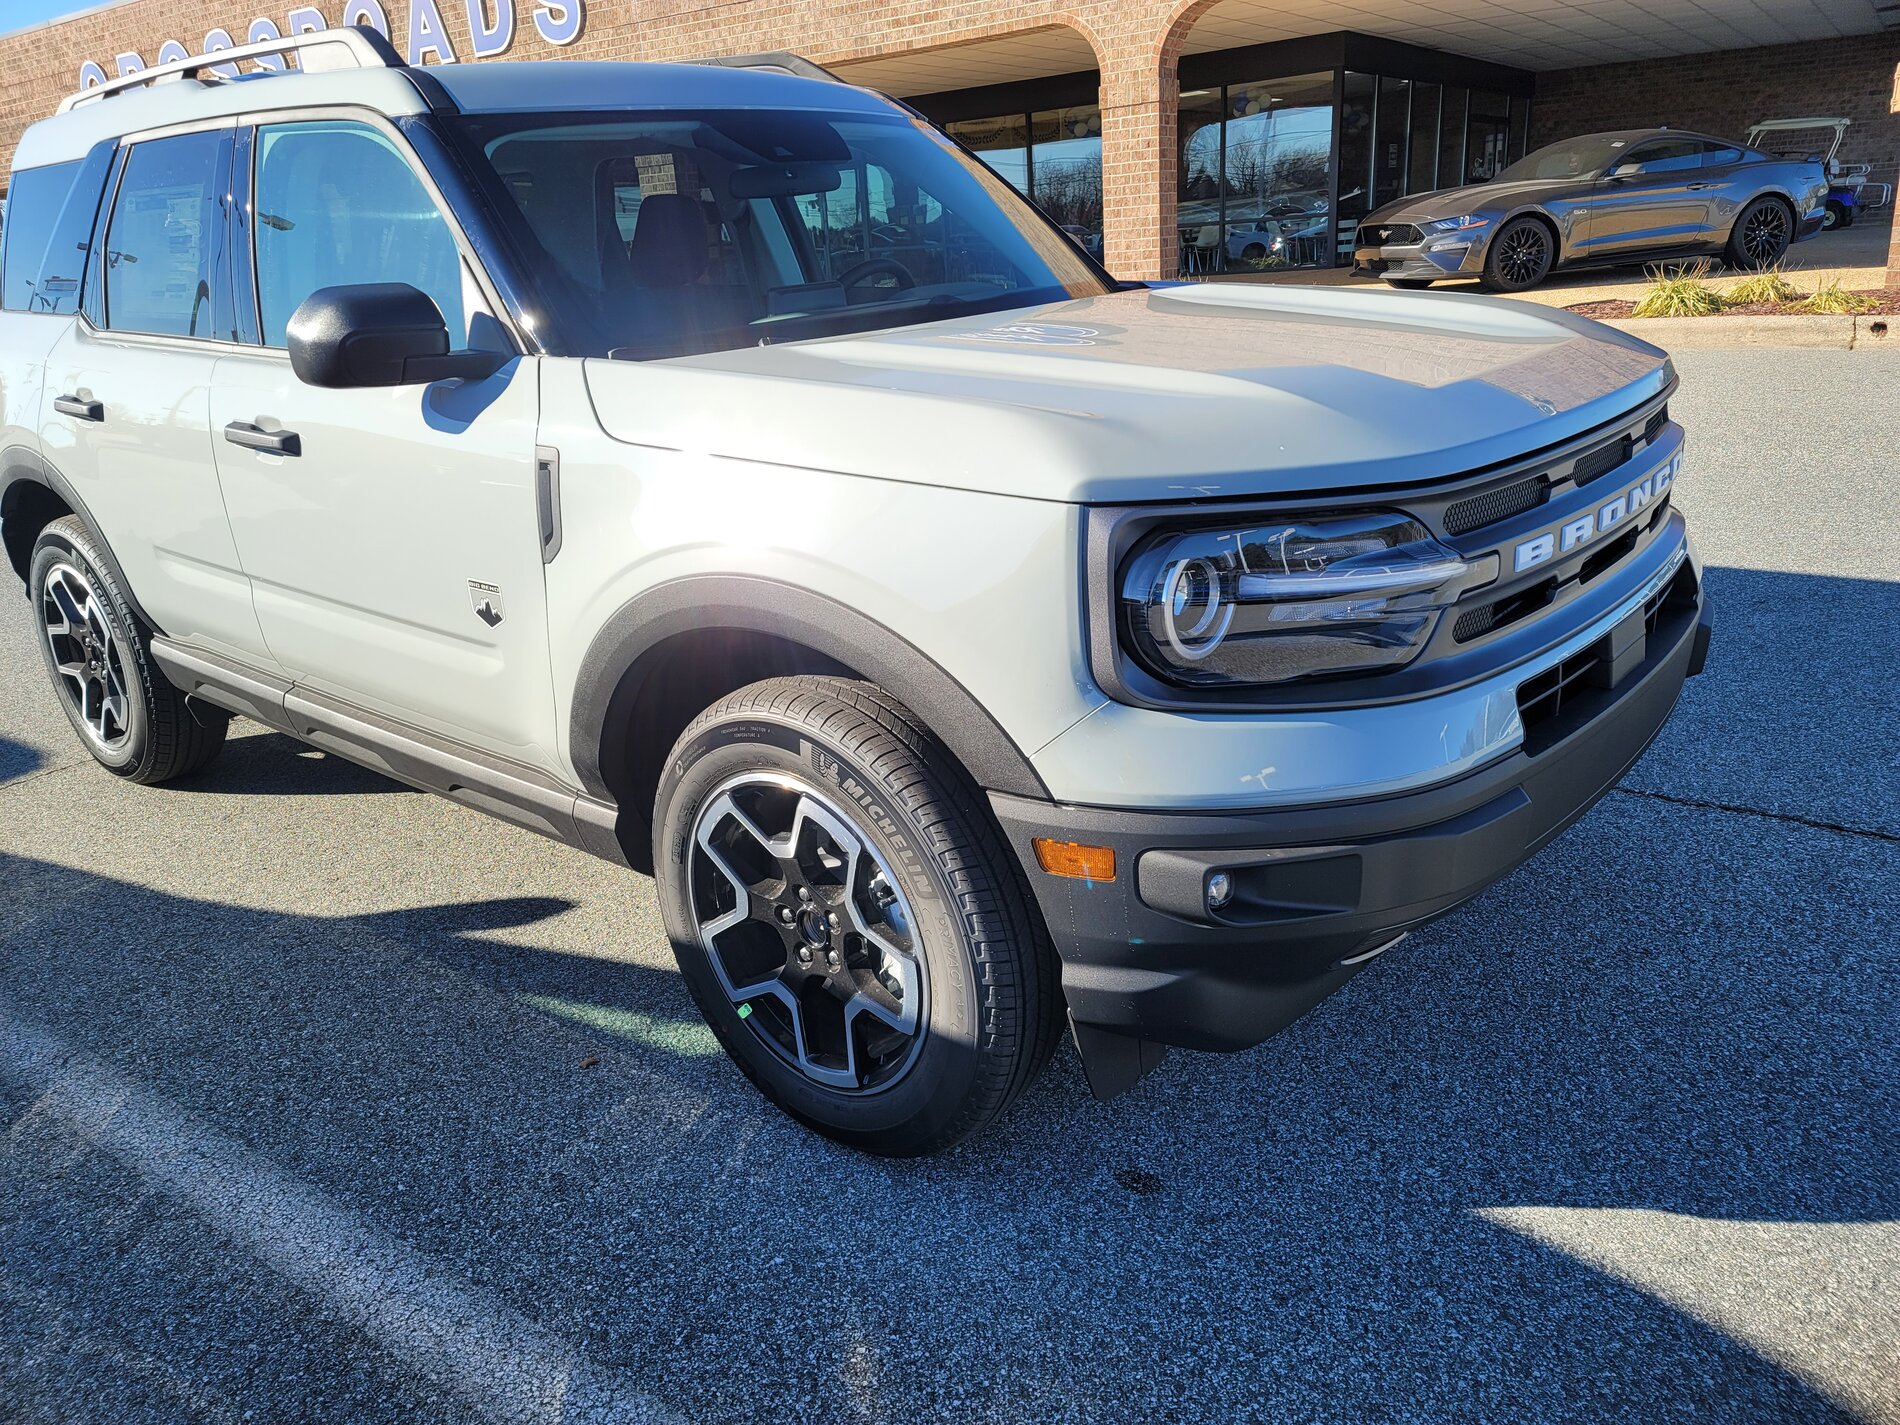 Ford Bronco Iconic Silver Paint Thread 20210106_101509